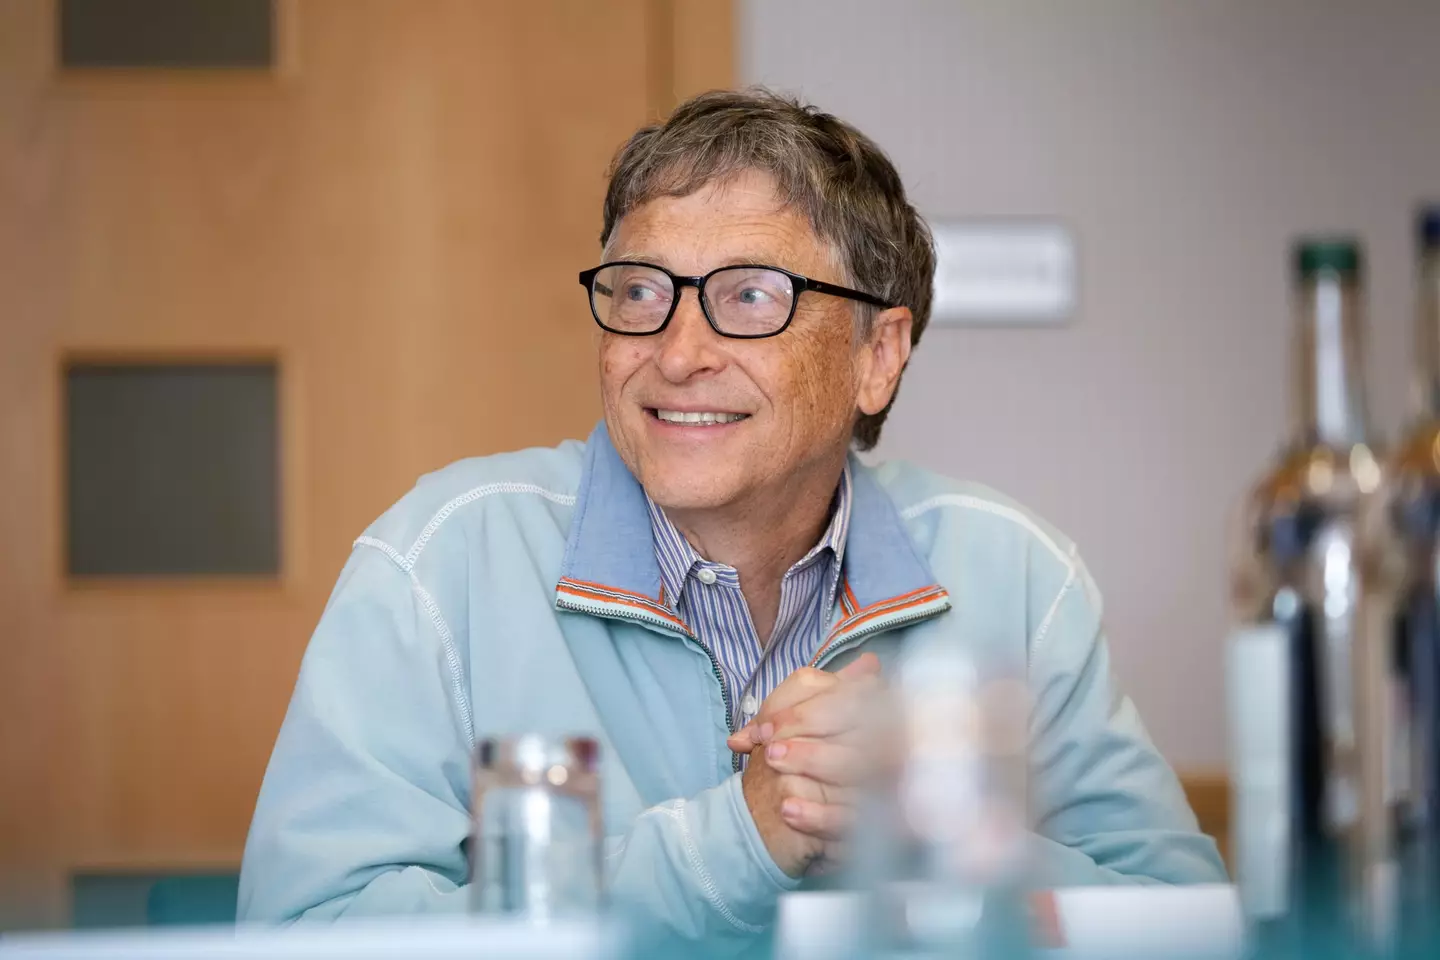 Gates is aiming to work his way down the rich list.